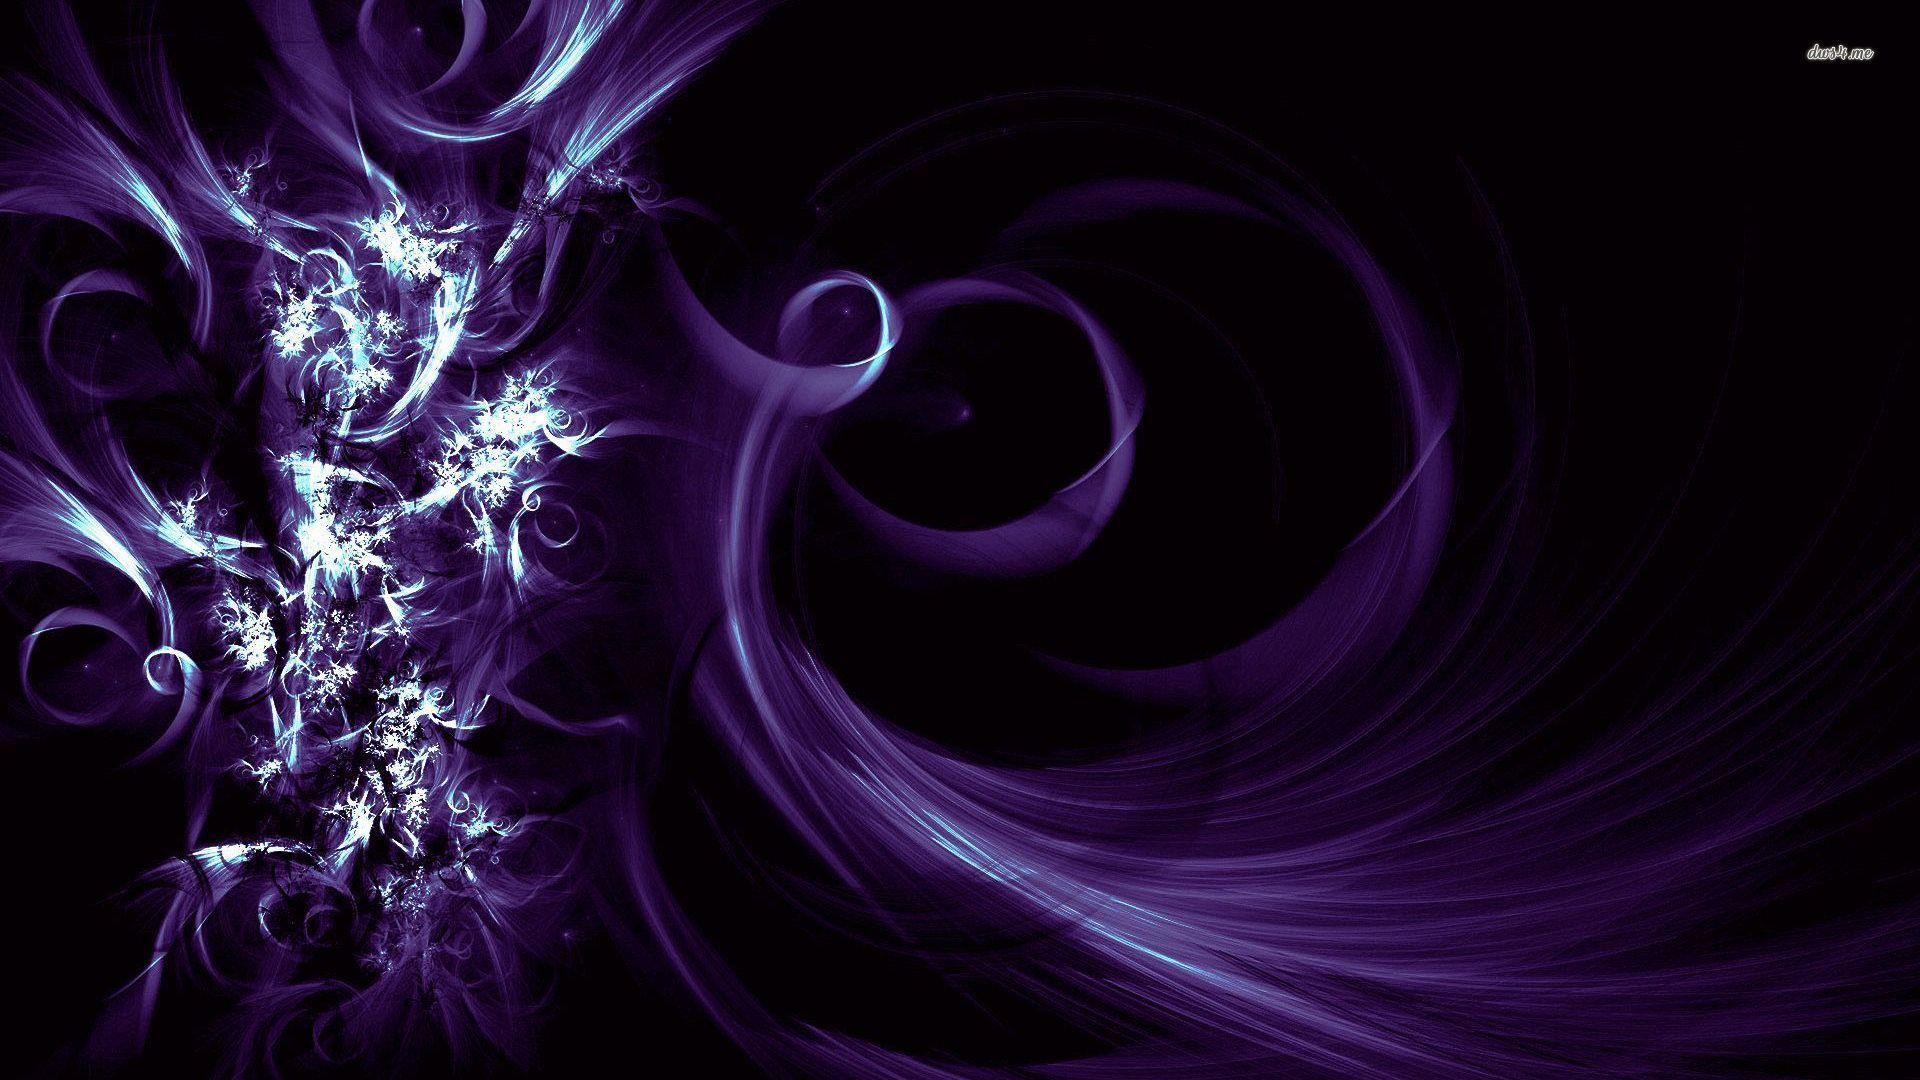 Black and Purple Abstract Wallpapers - Top Free Black and Purple Abstract Backgrounds